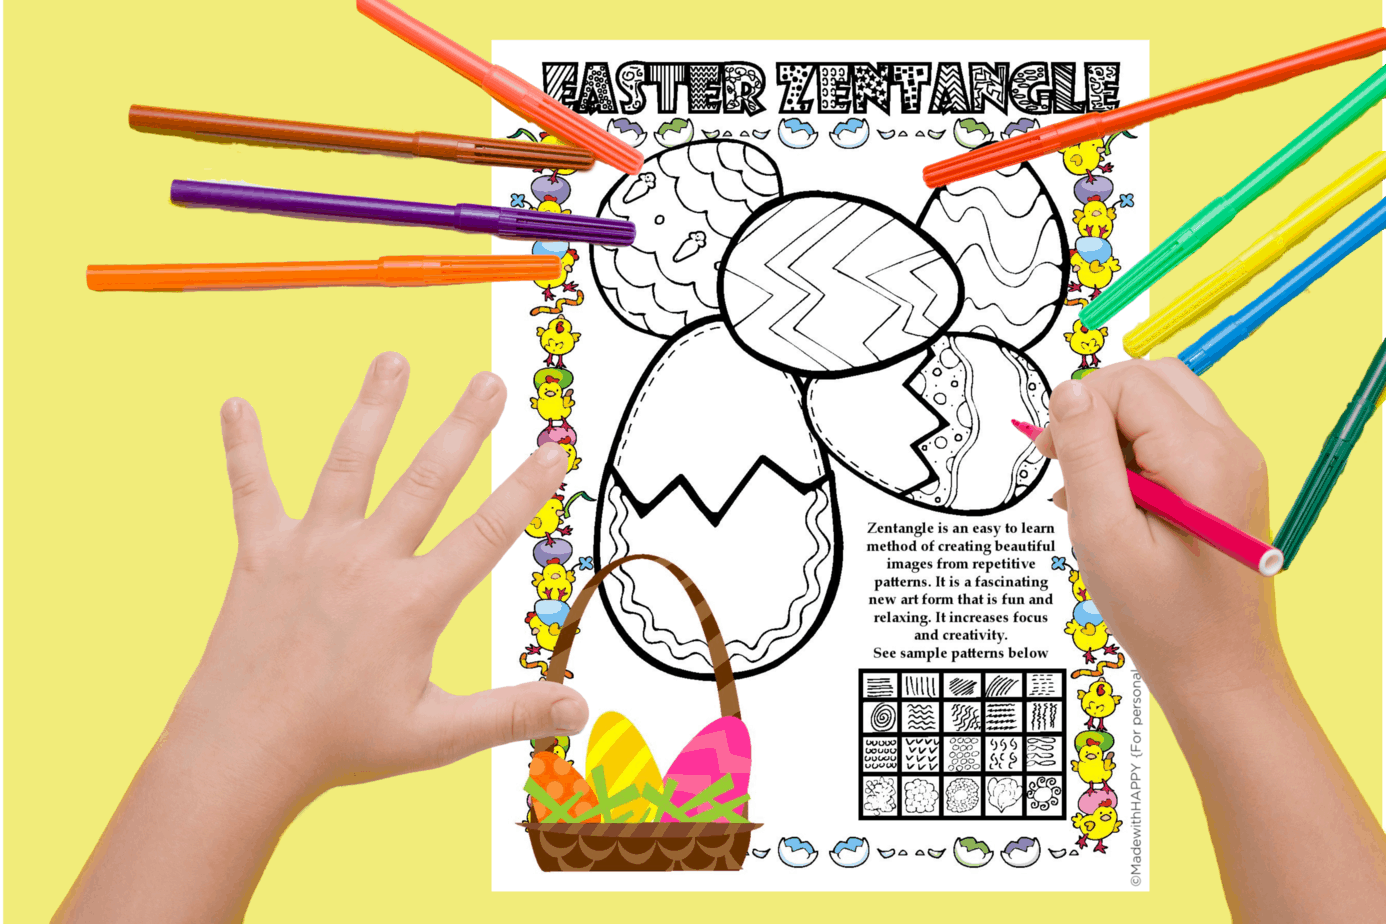 Free Easter Egg Coloring Page